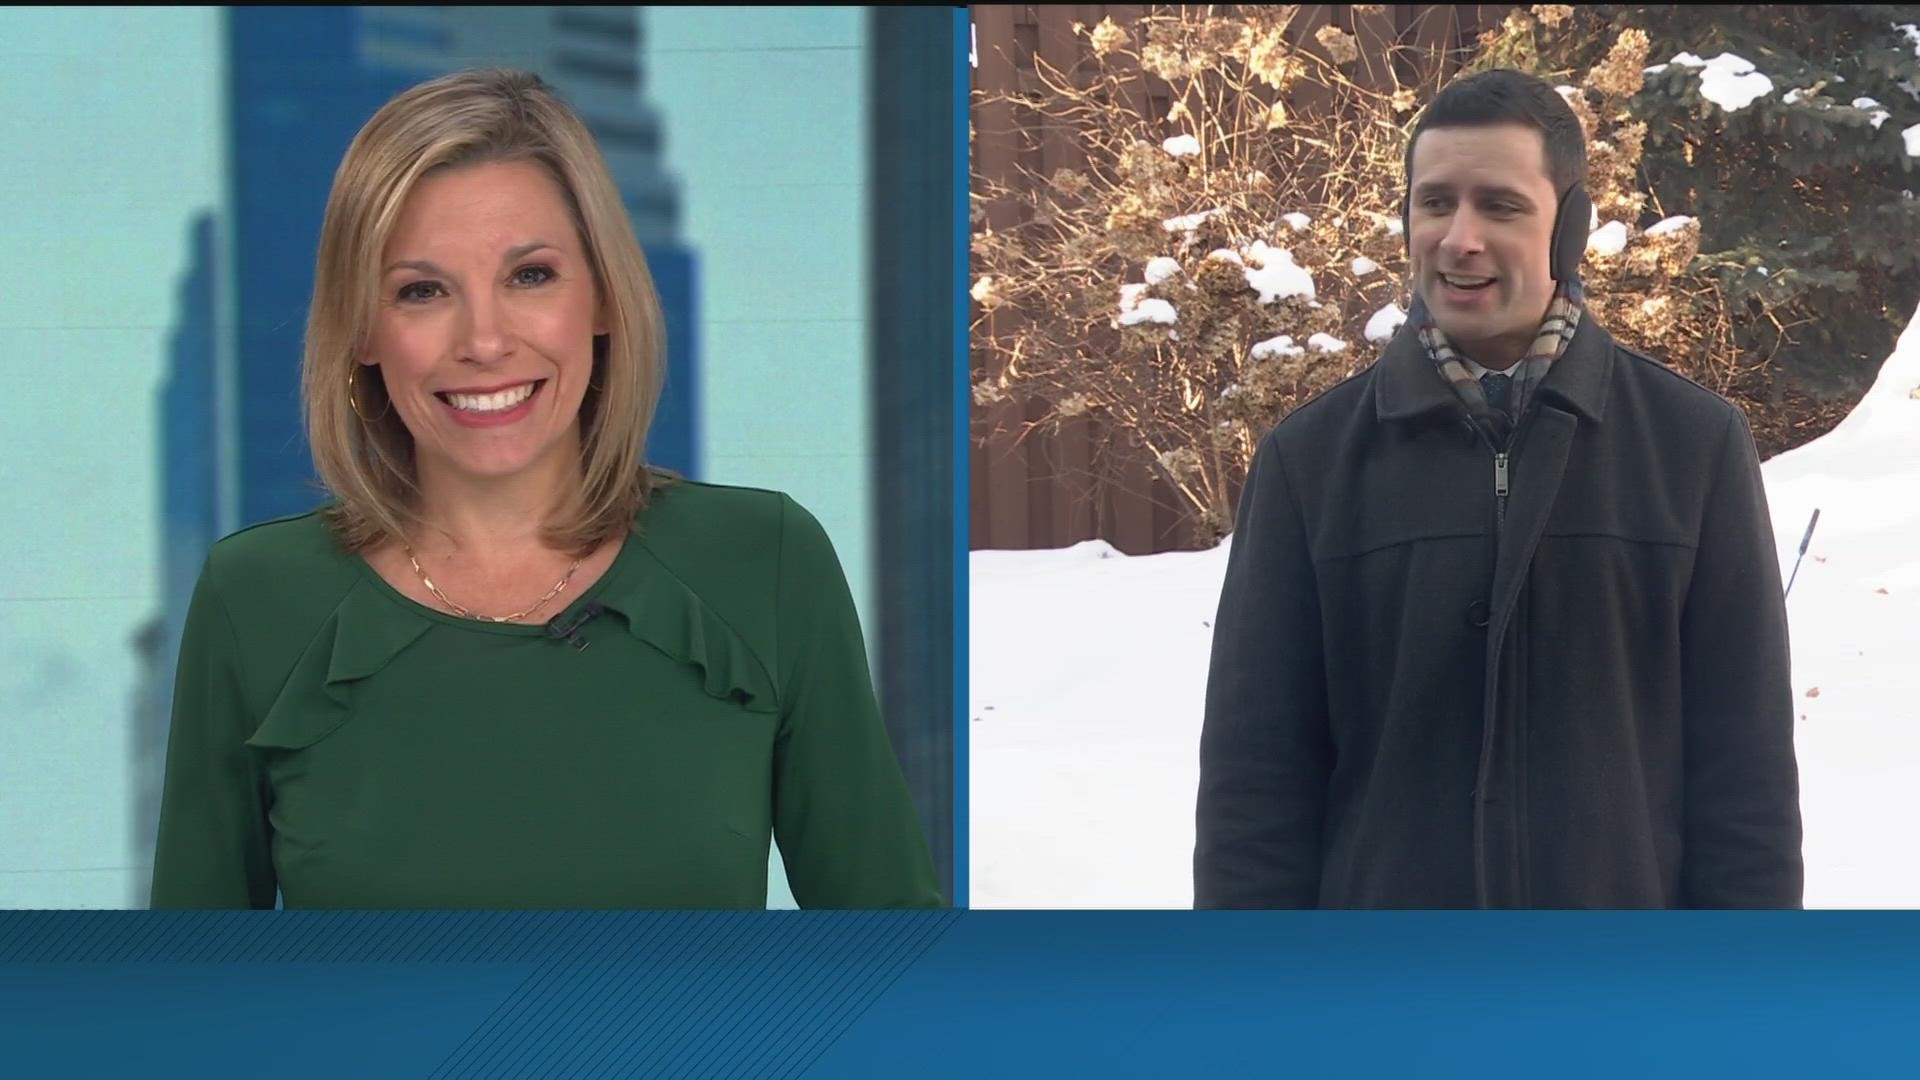 Watch the latest news and weather updates on KARE 11 News Now for Feb. 2, 2023.